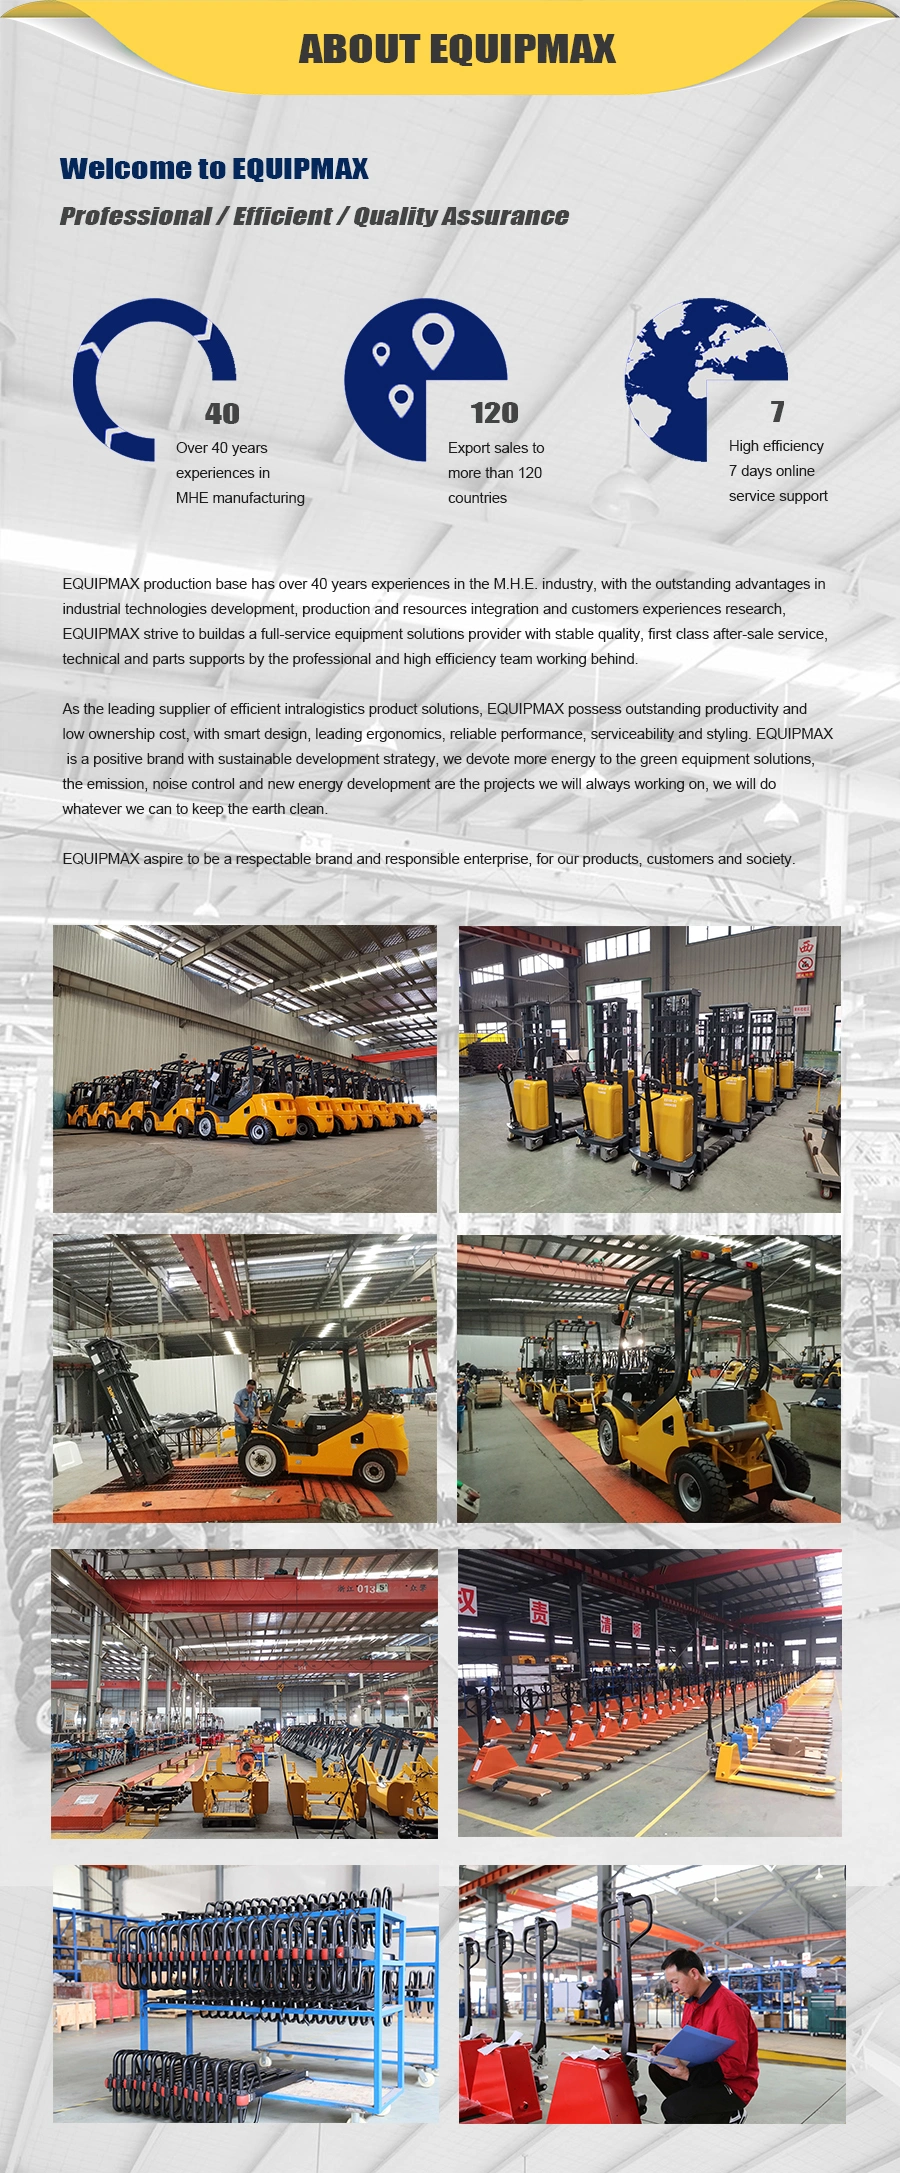 Paper Roll Handling Equipment Forklift Clamp Price